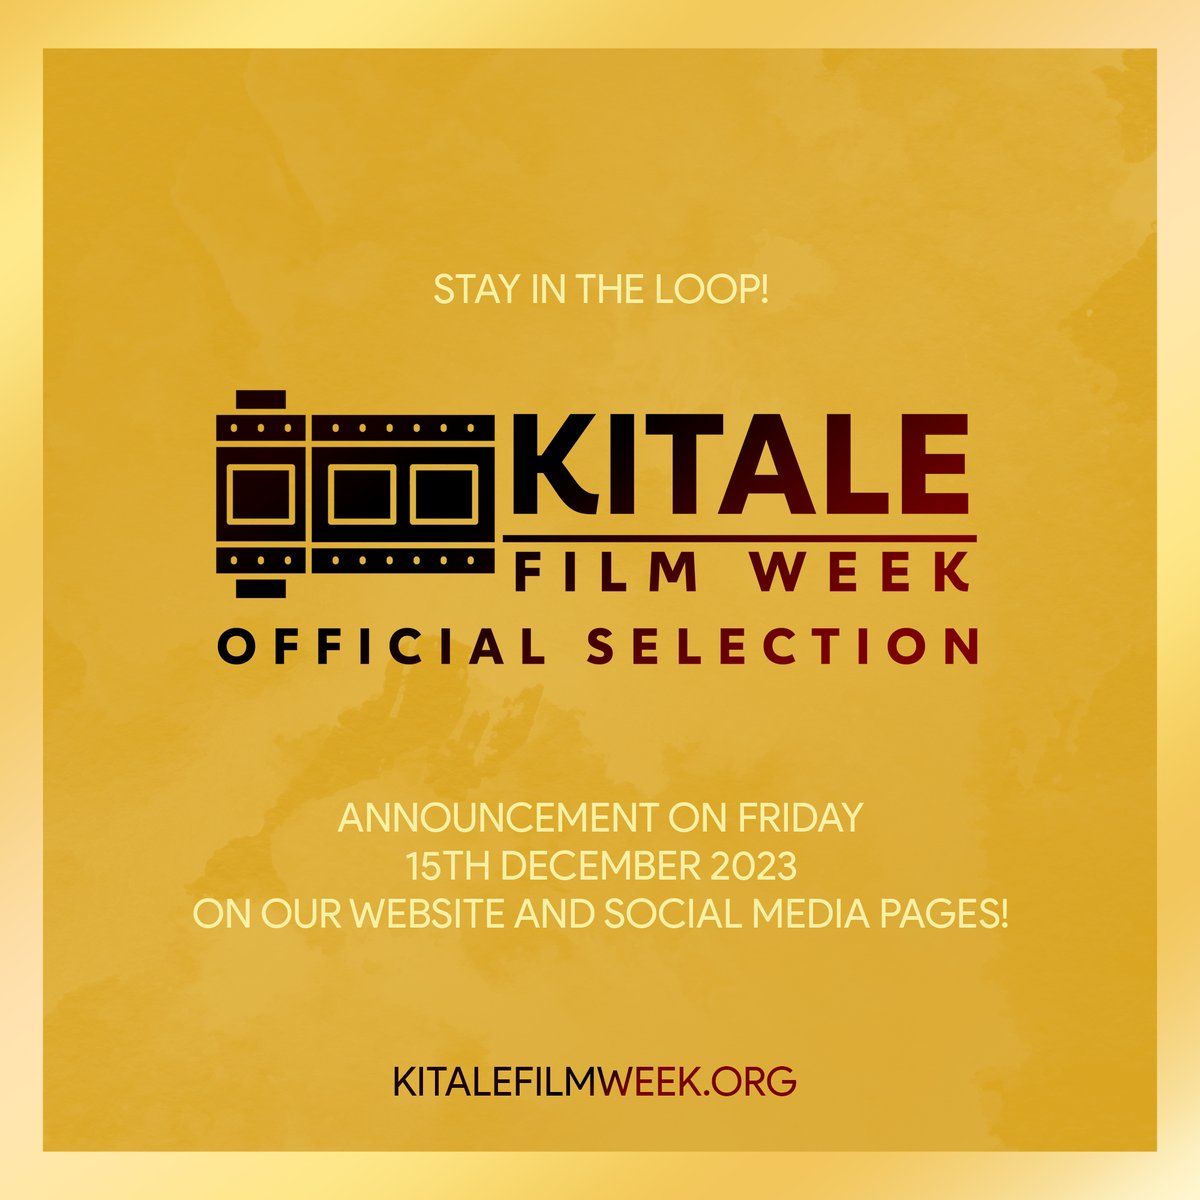 Stay in touch with our social media to receive the announcement of the official selection for the Kitale Film Week 2024 this Friday. Save the dates for the festival from 4th to 11th February 2024  in Kitale, Kenya. #kitalefilmweek #africanfilm #officialselection